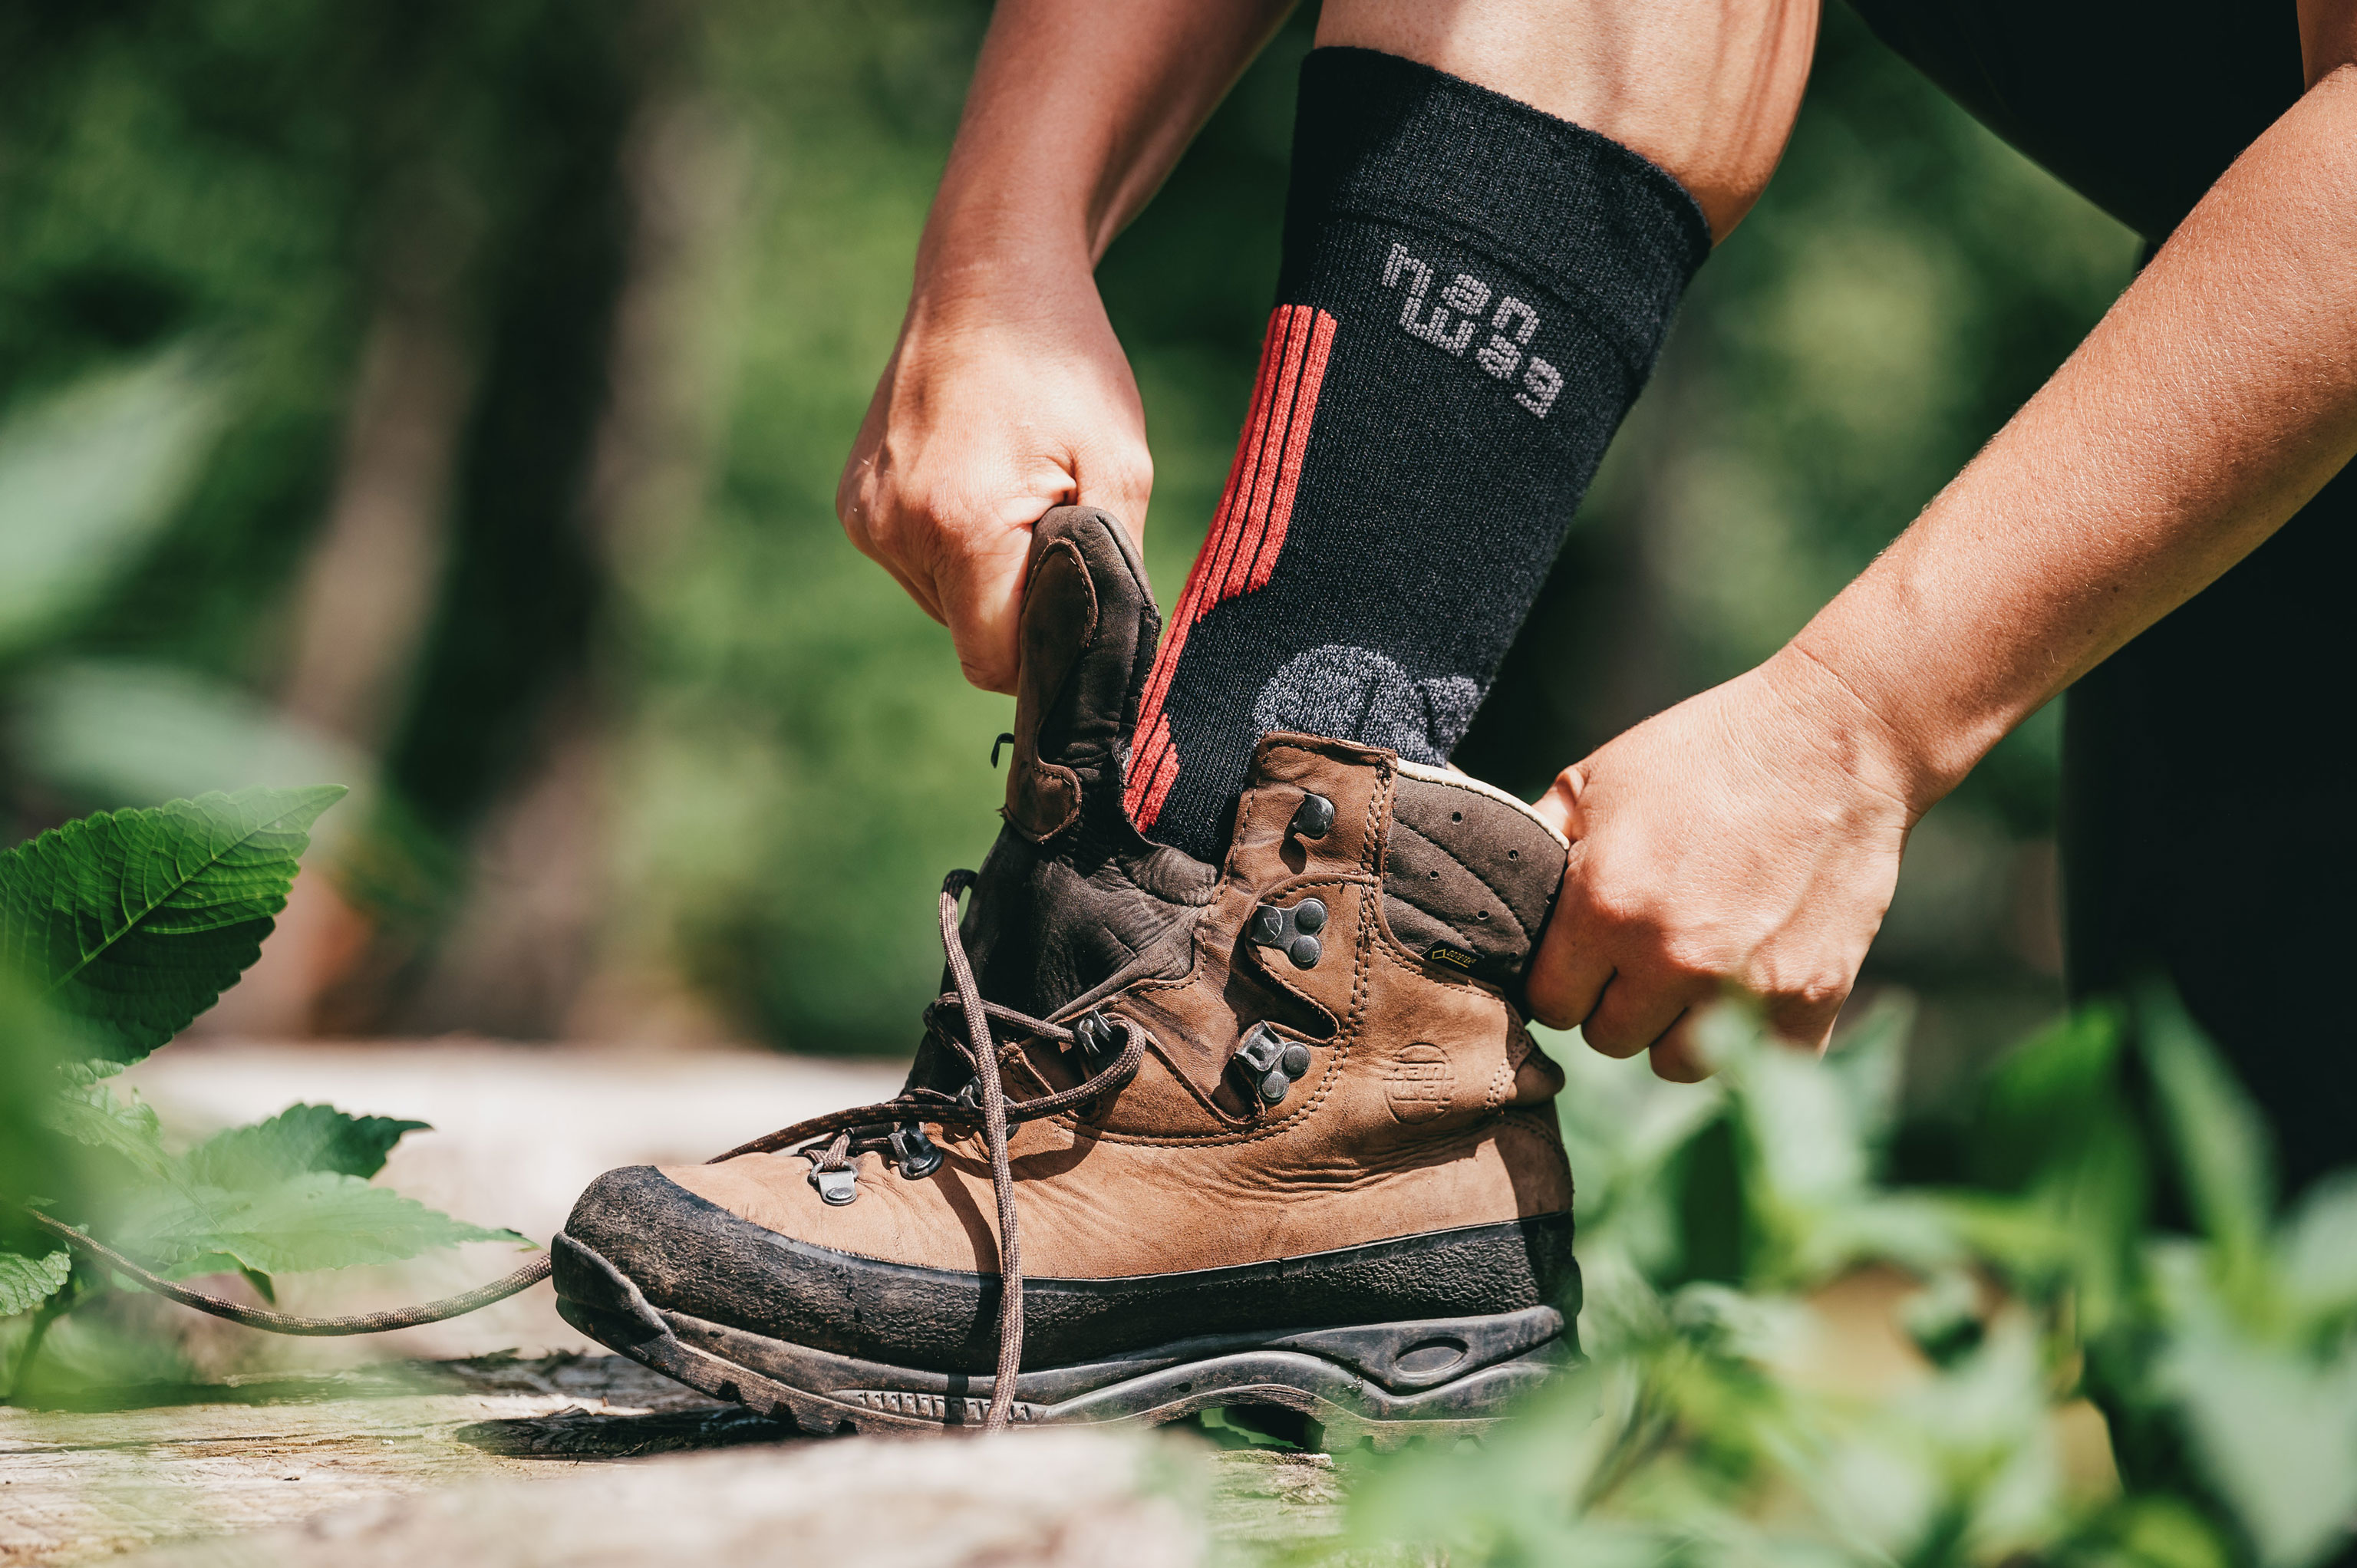 Best socks for hiking boots Trekking boots